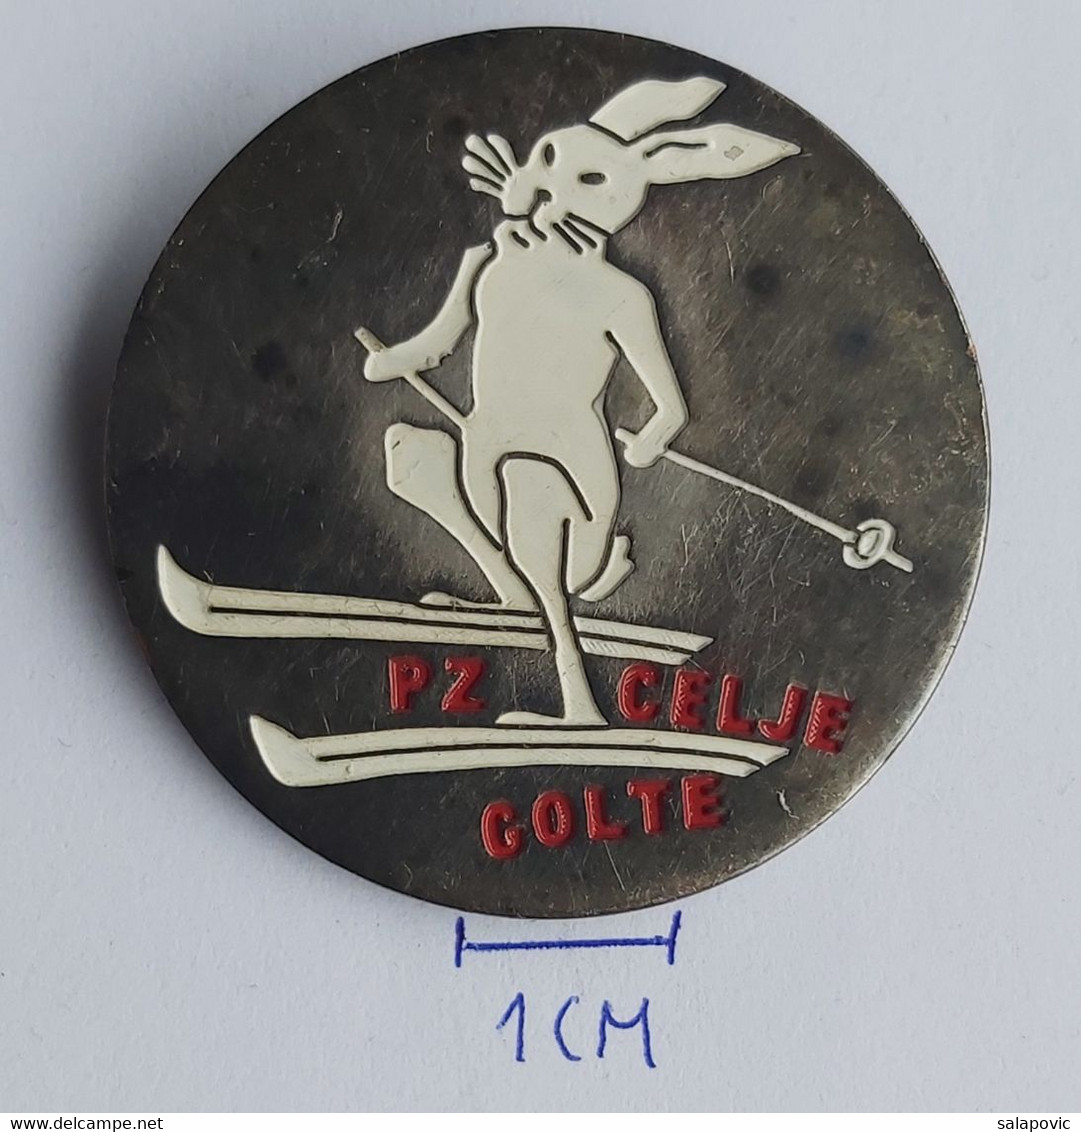 PZ Celje Golte Skiing Slovenia Alpinism (Mountaineering / Hiking) PIN P3/4 - Sports D'hiver